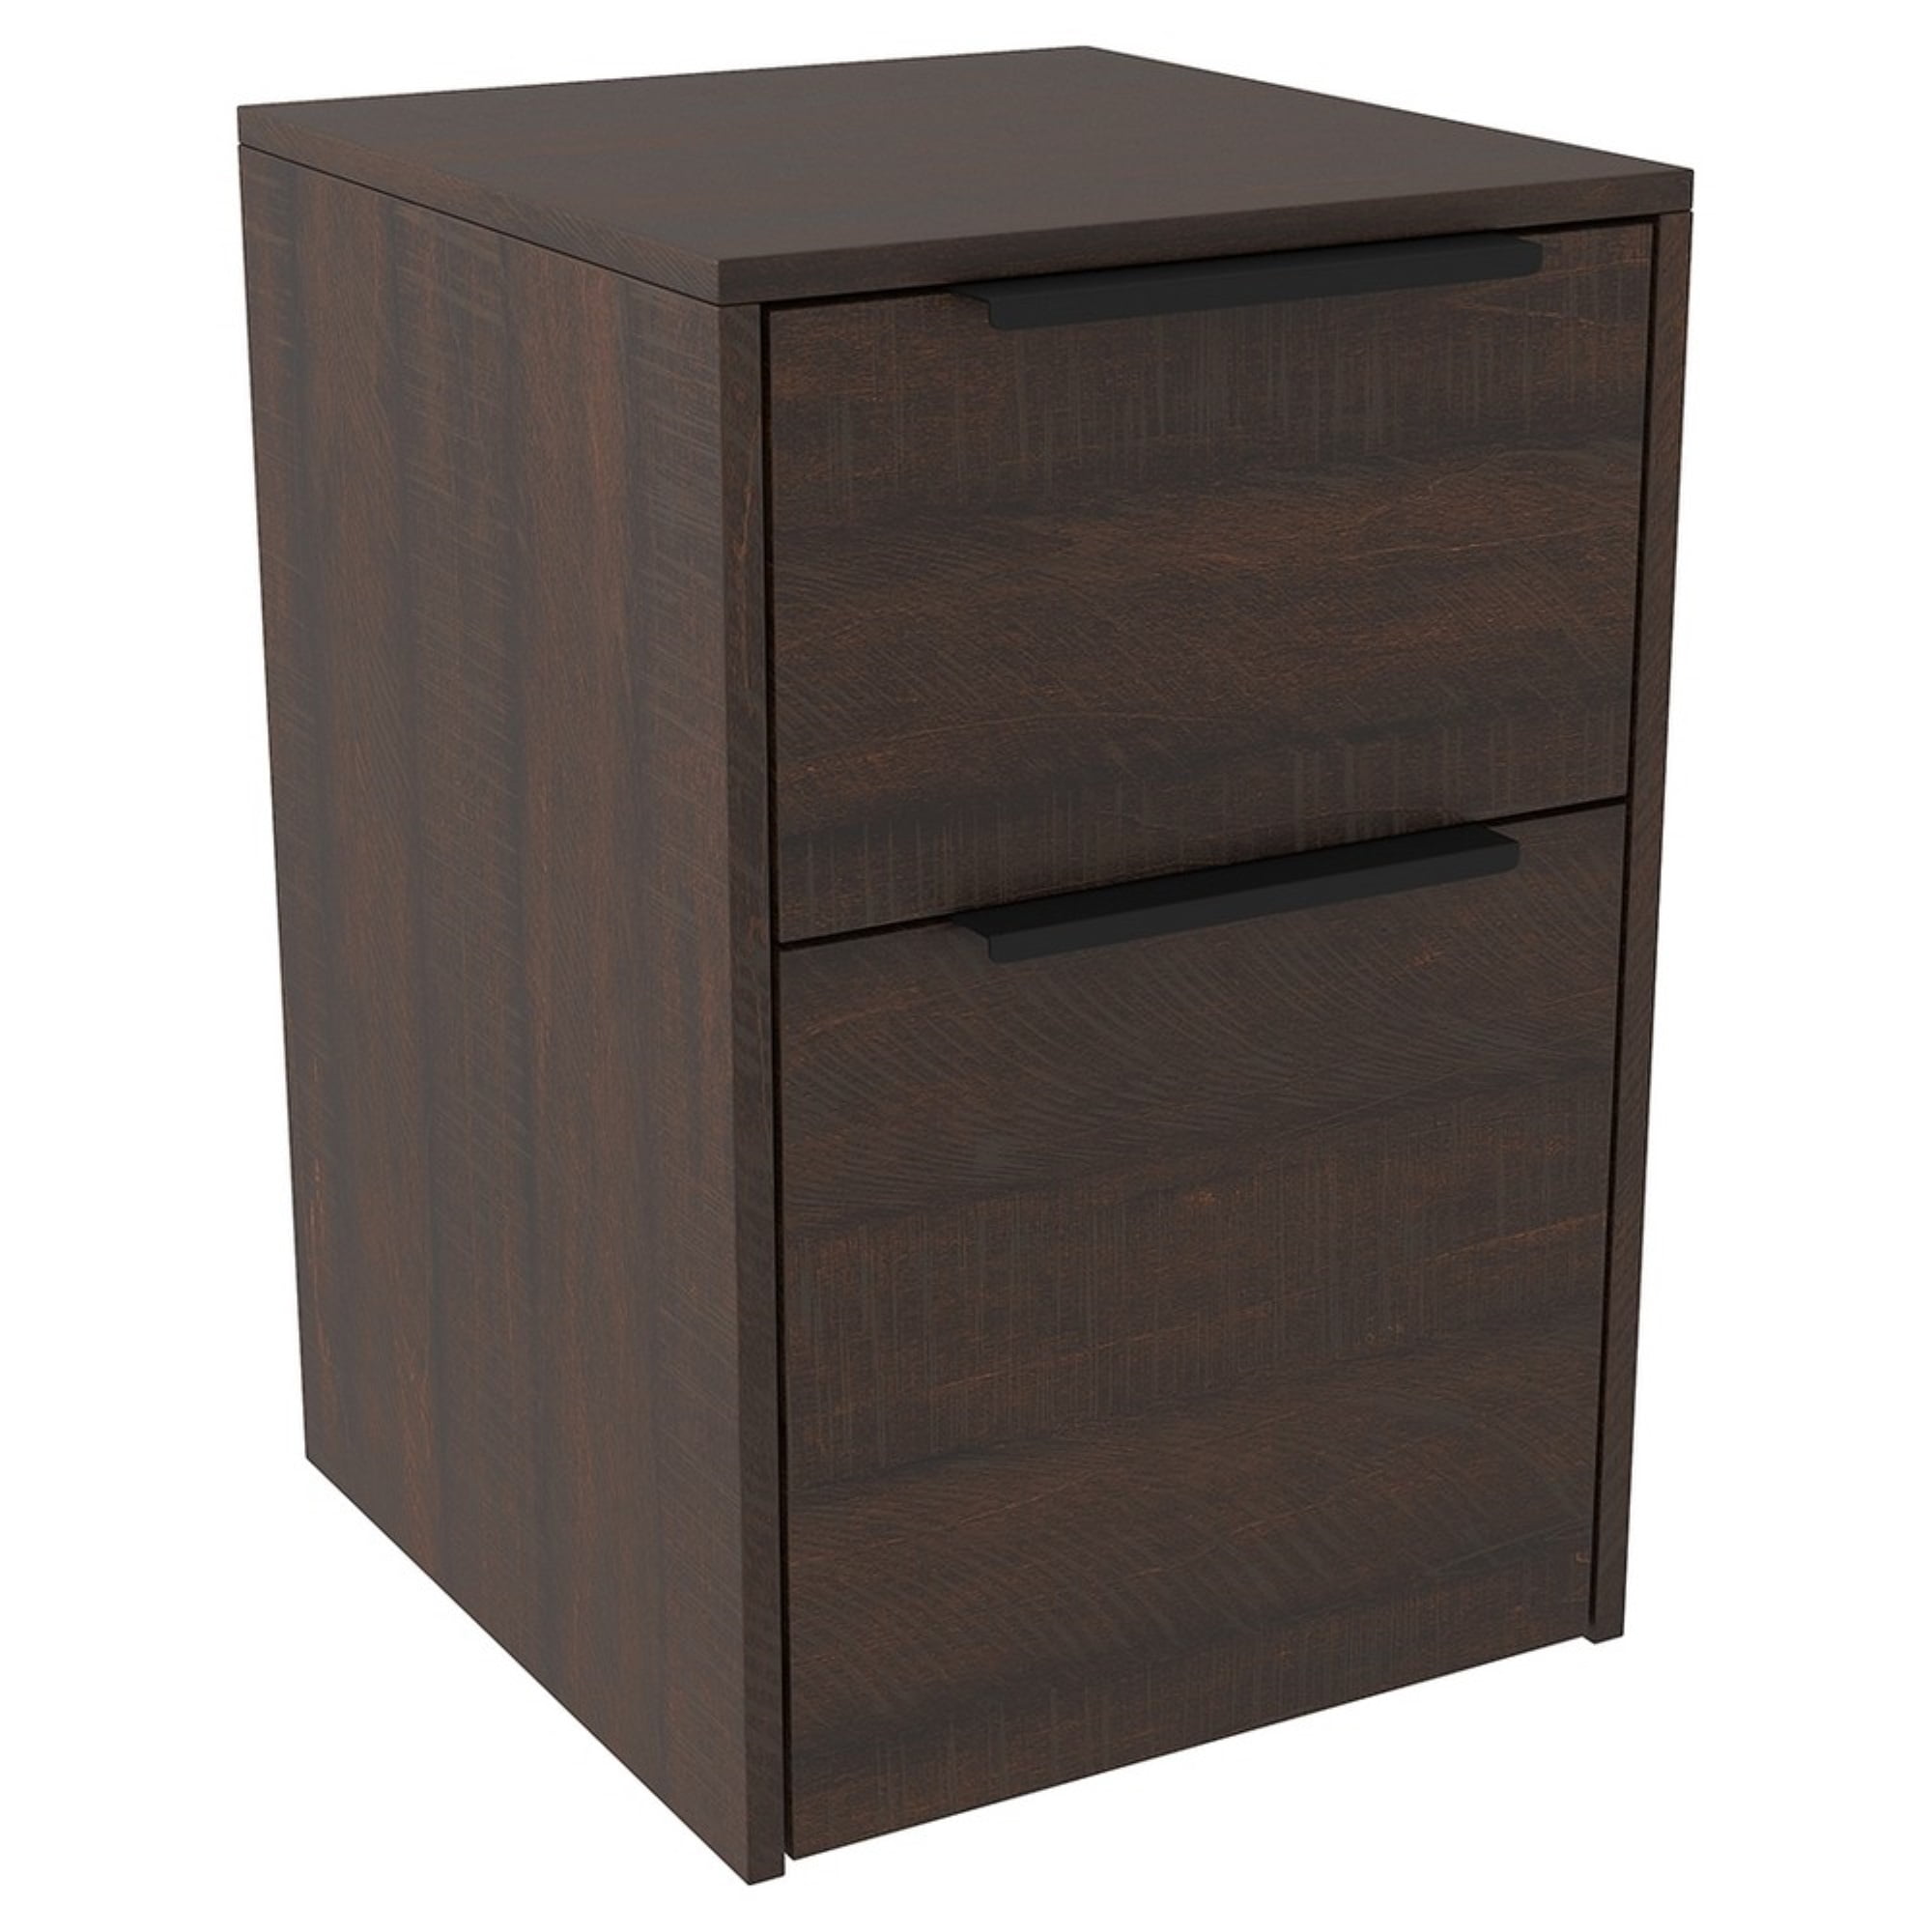 Two Tone Wooden File Cabinet with 2 File Drawers - Dark Brown -  DeluxDesigns, DE2530593